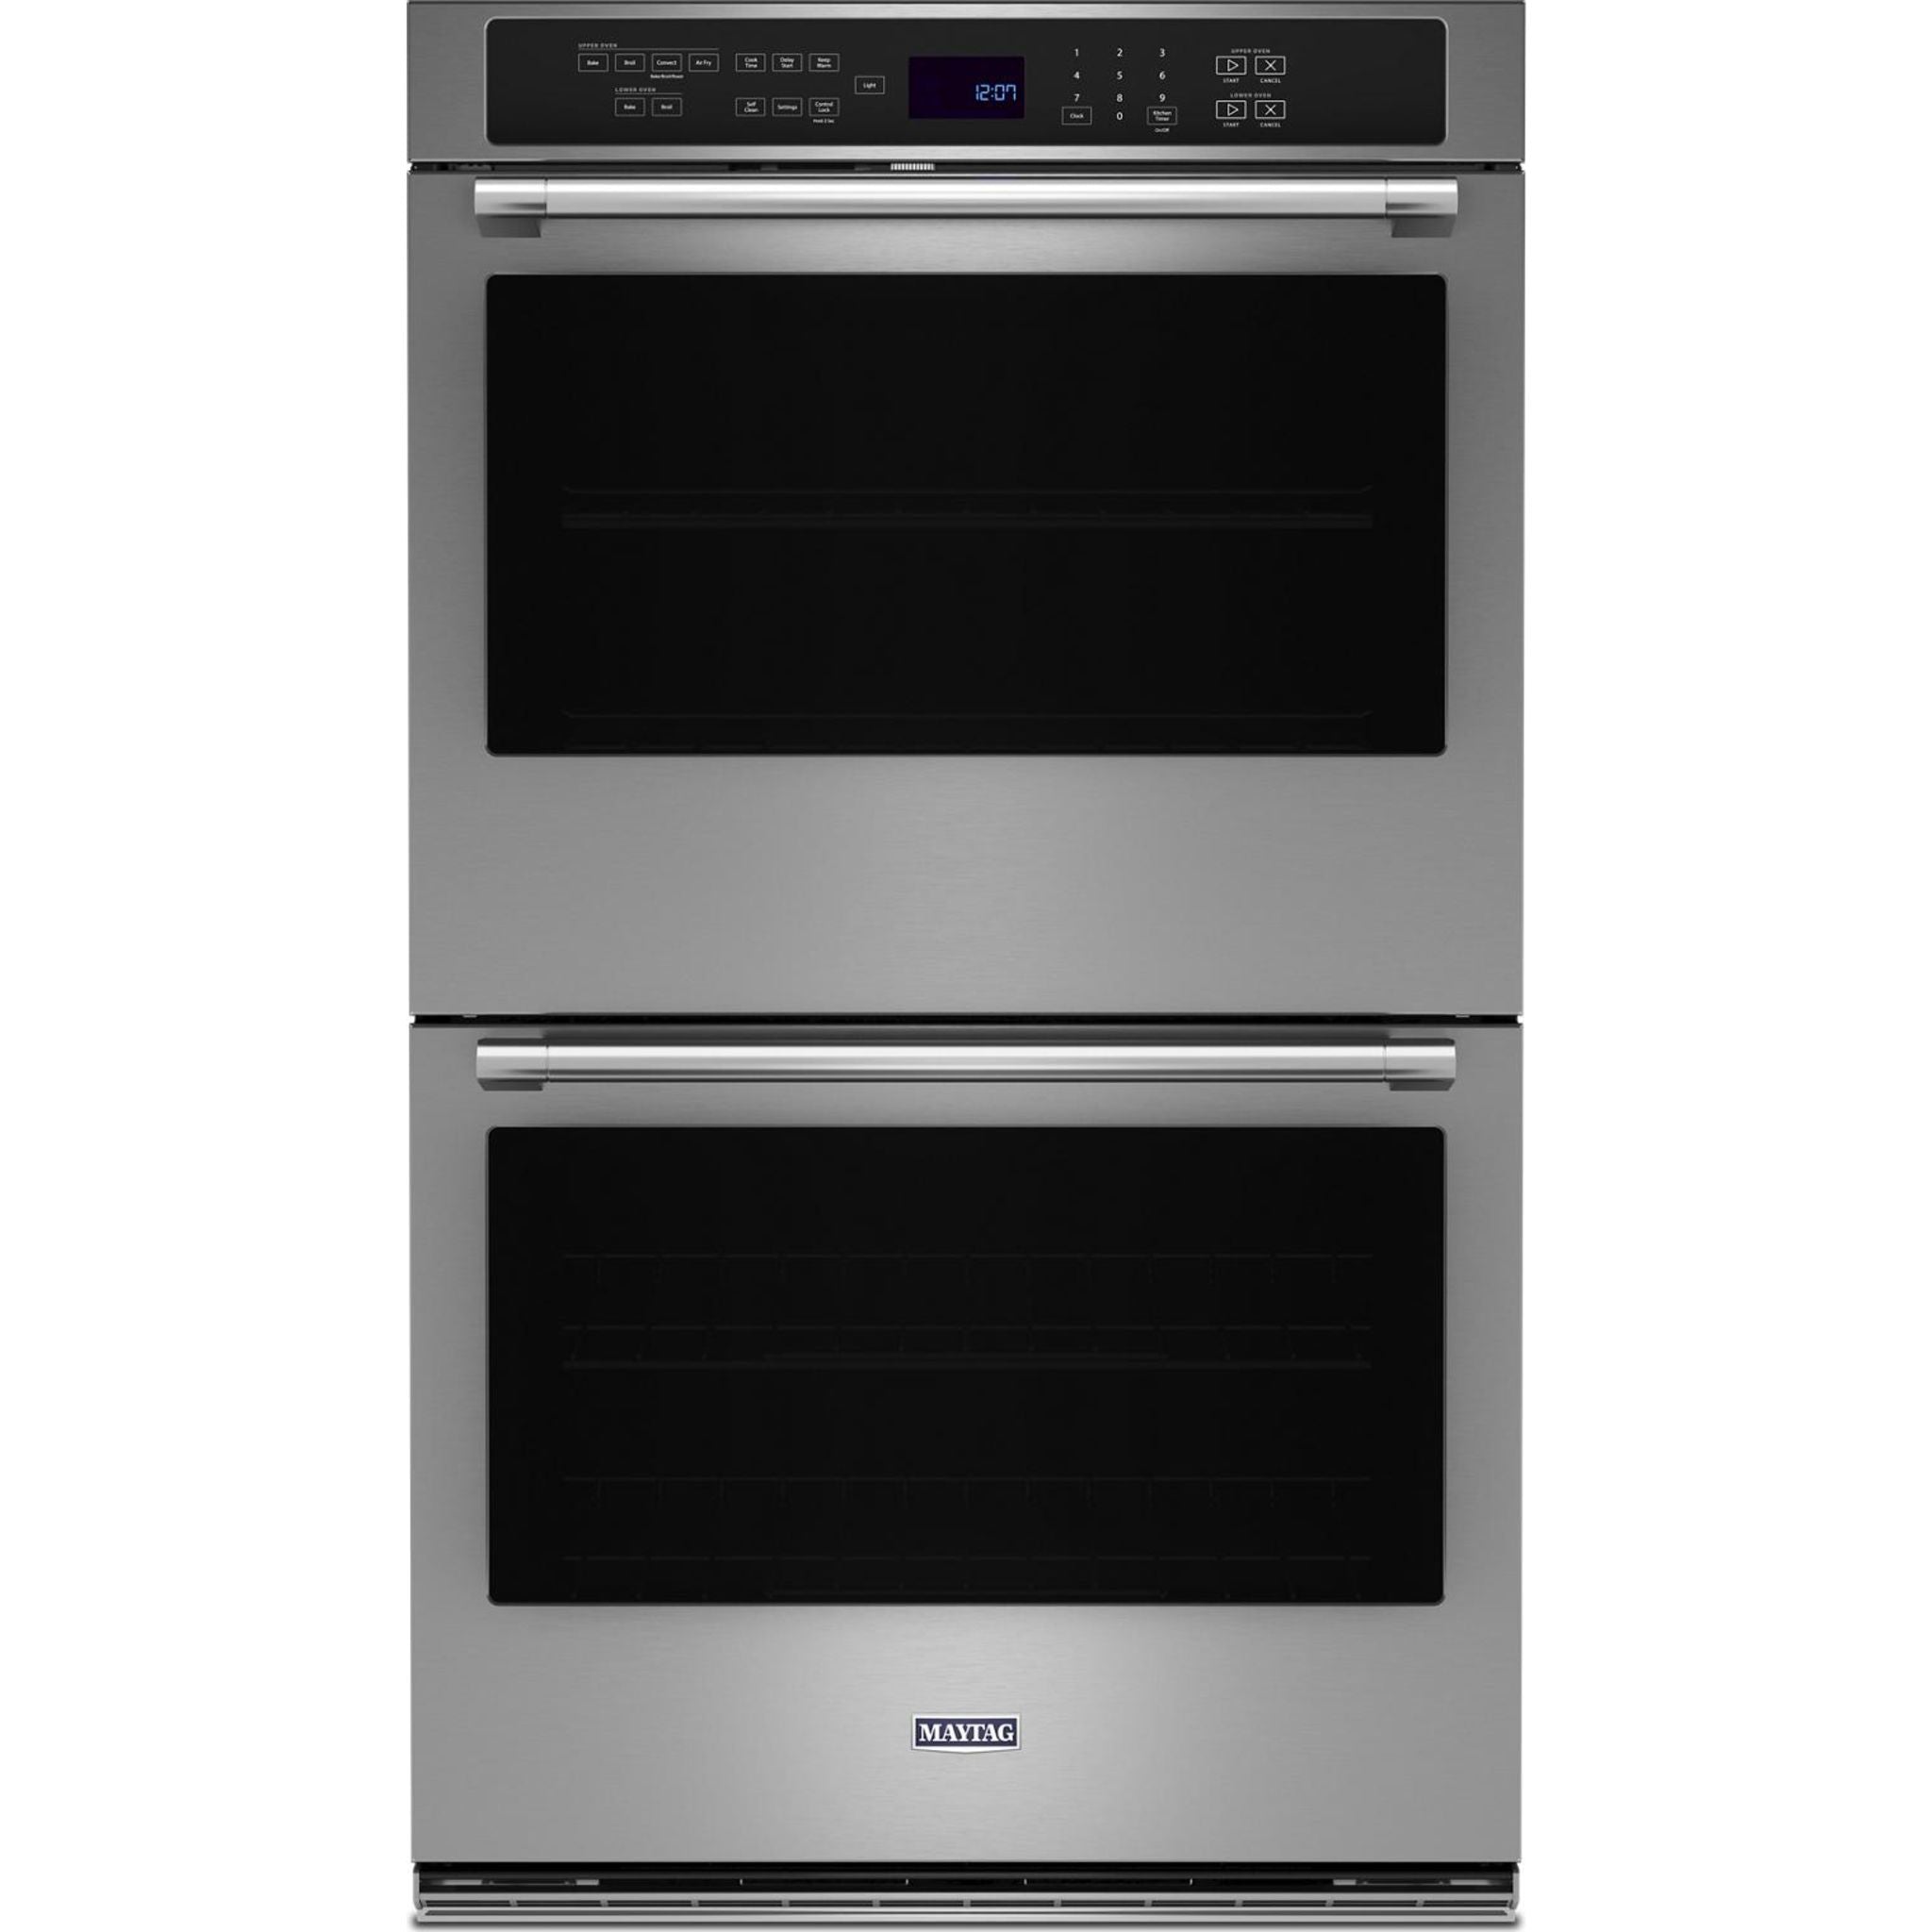 Maytag, Maytag 27" Convection Wall Oven (MOED6027LZ) - Fingerprint Resistant Stainless Steel